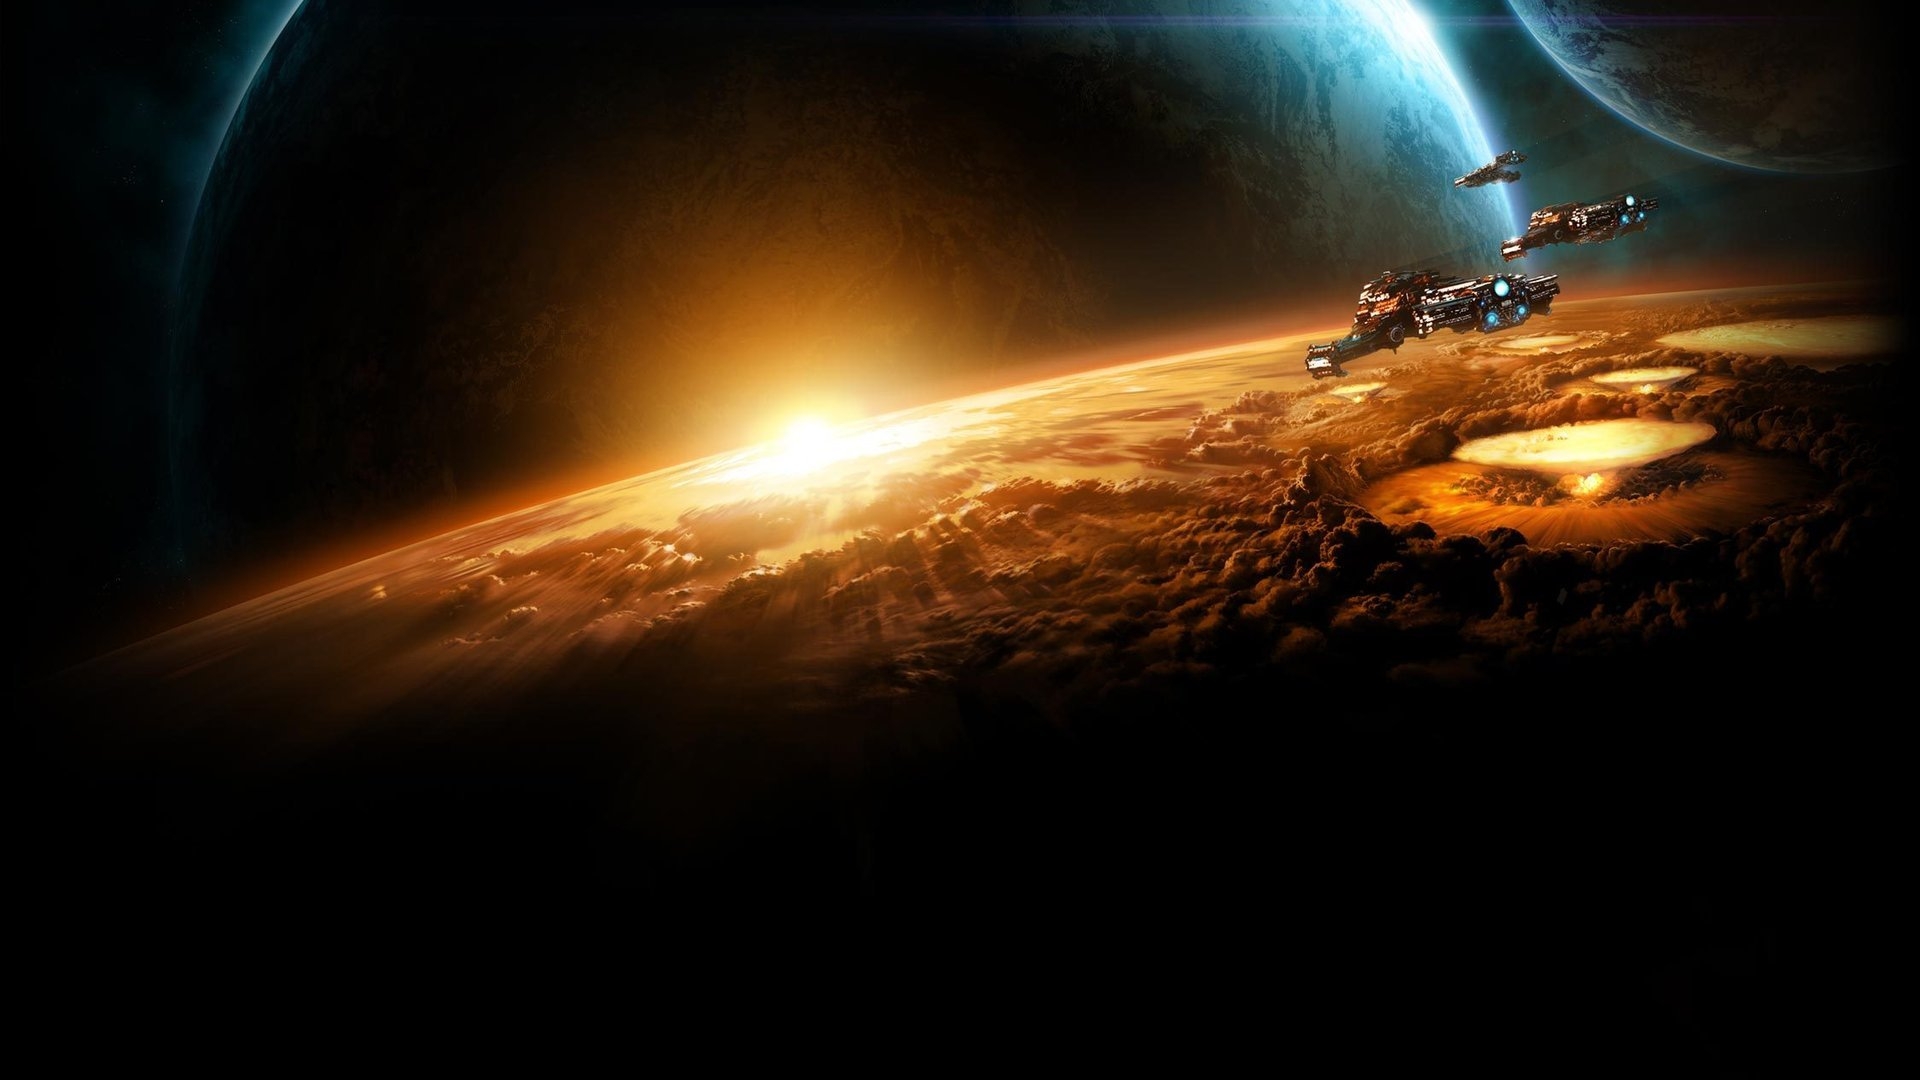 Space Mission for 1920 x 1080 HDTV 1080p resolution